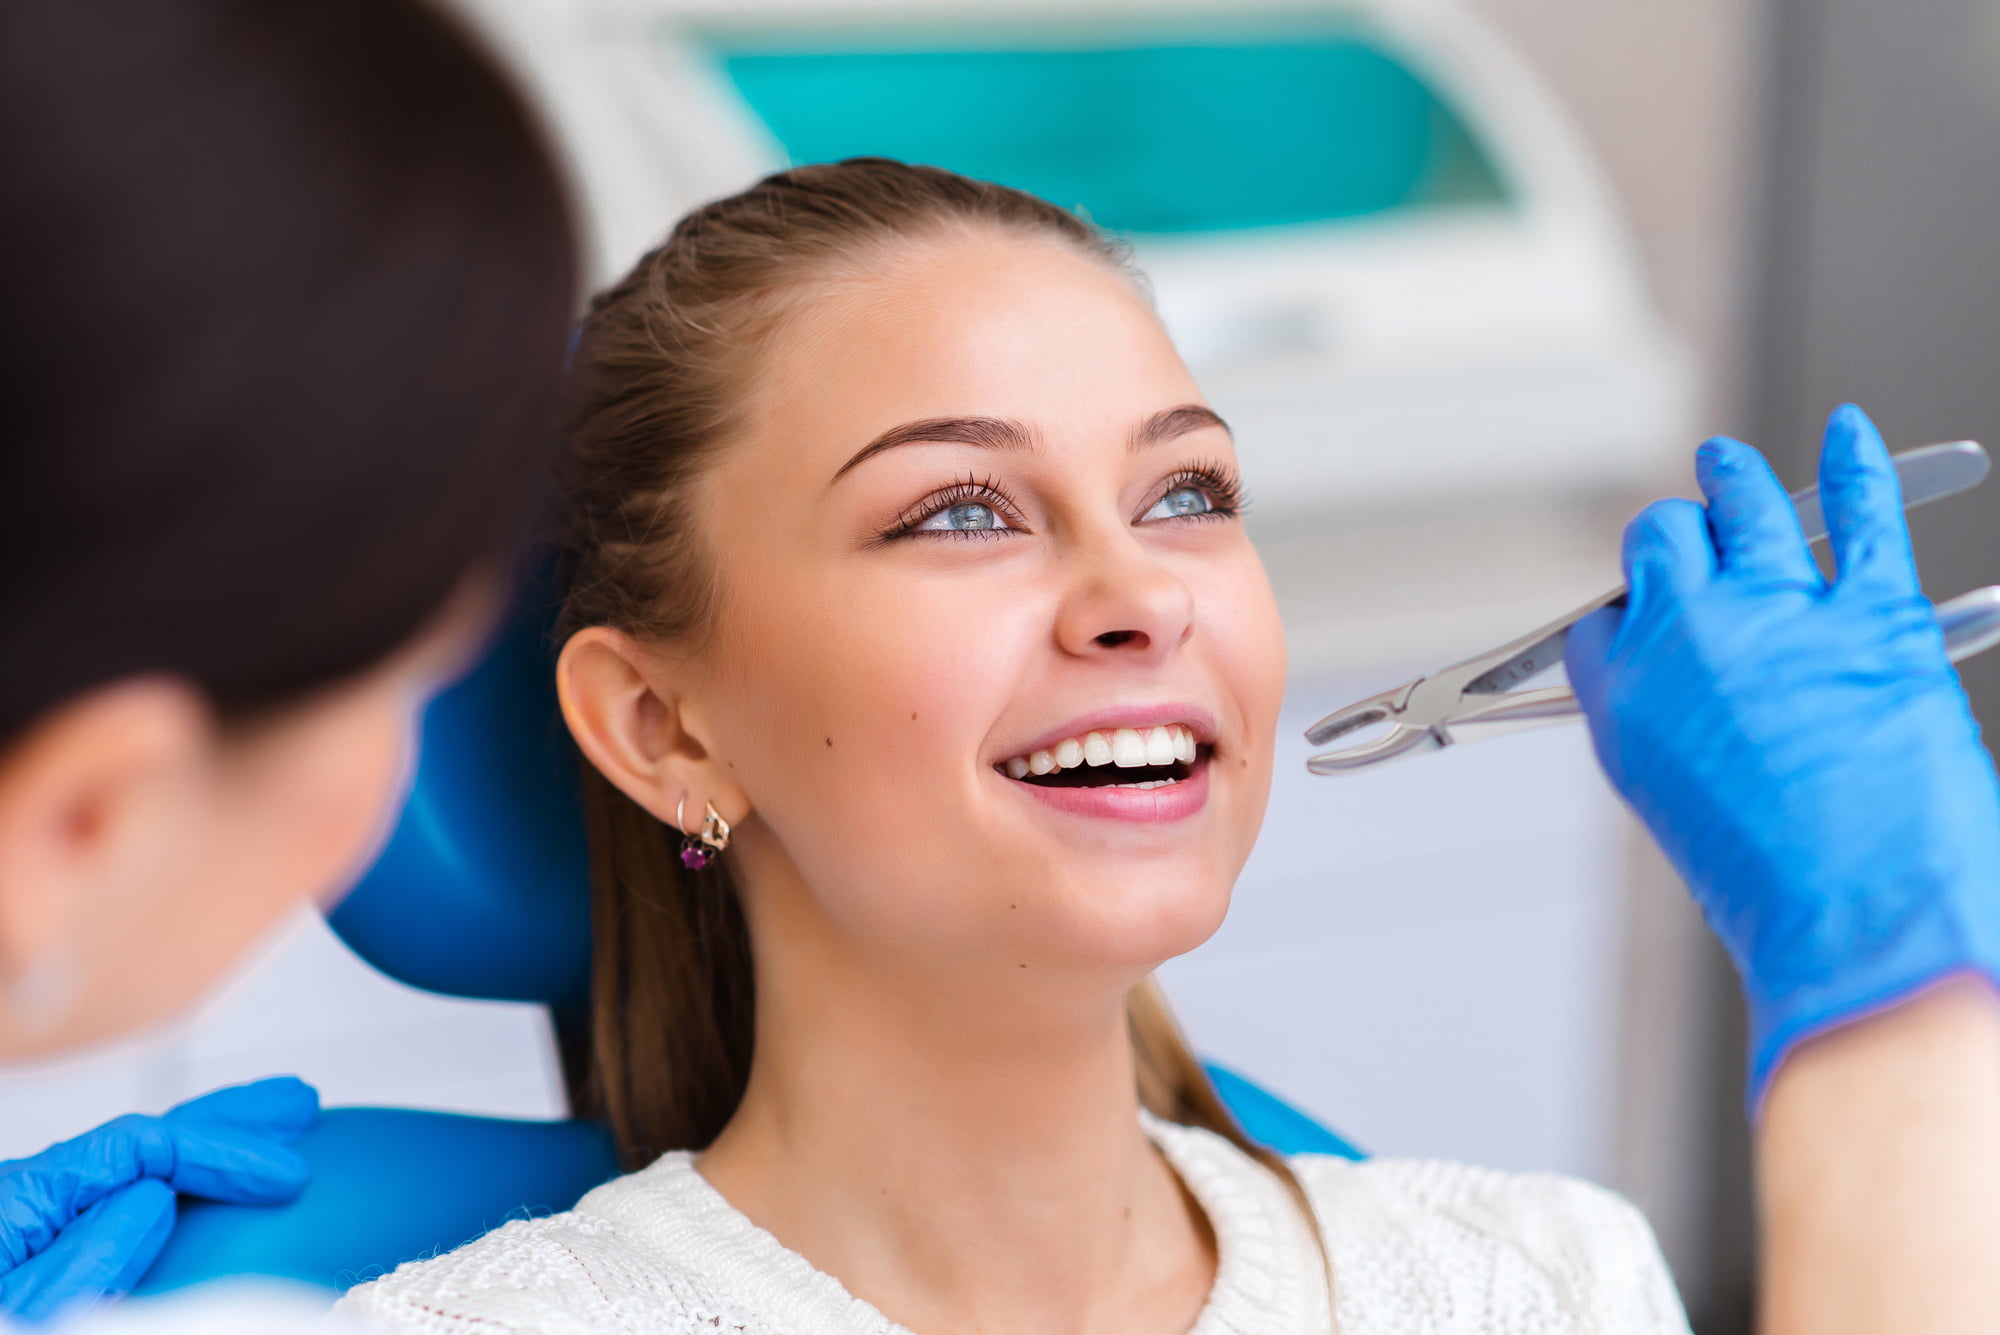 Tooth extraction near me: Are you planning to have a tooth extracted? Do you want to know what it costs? Read on to learn more.